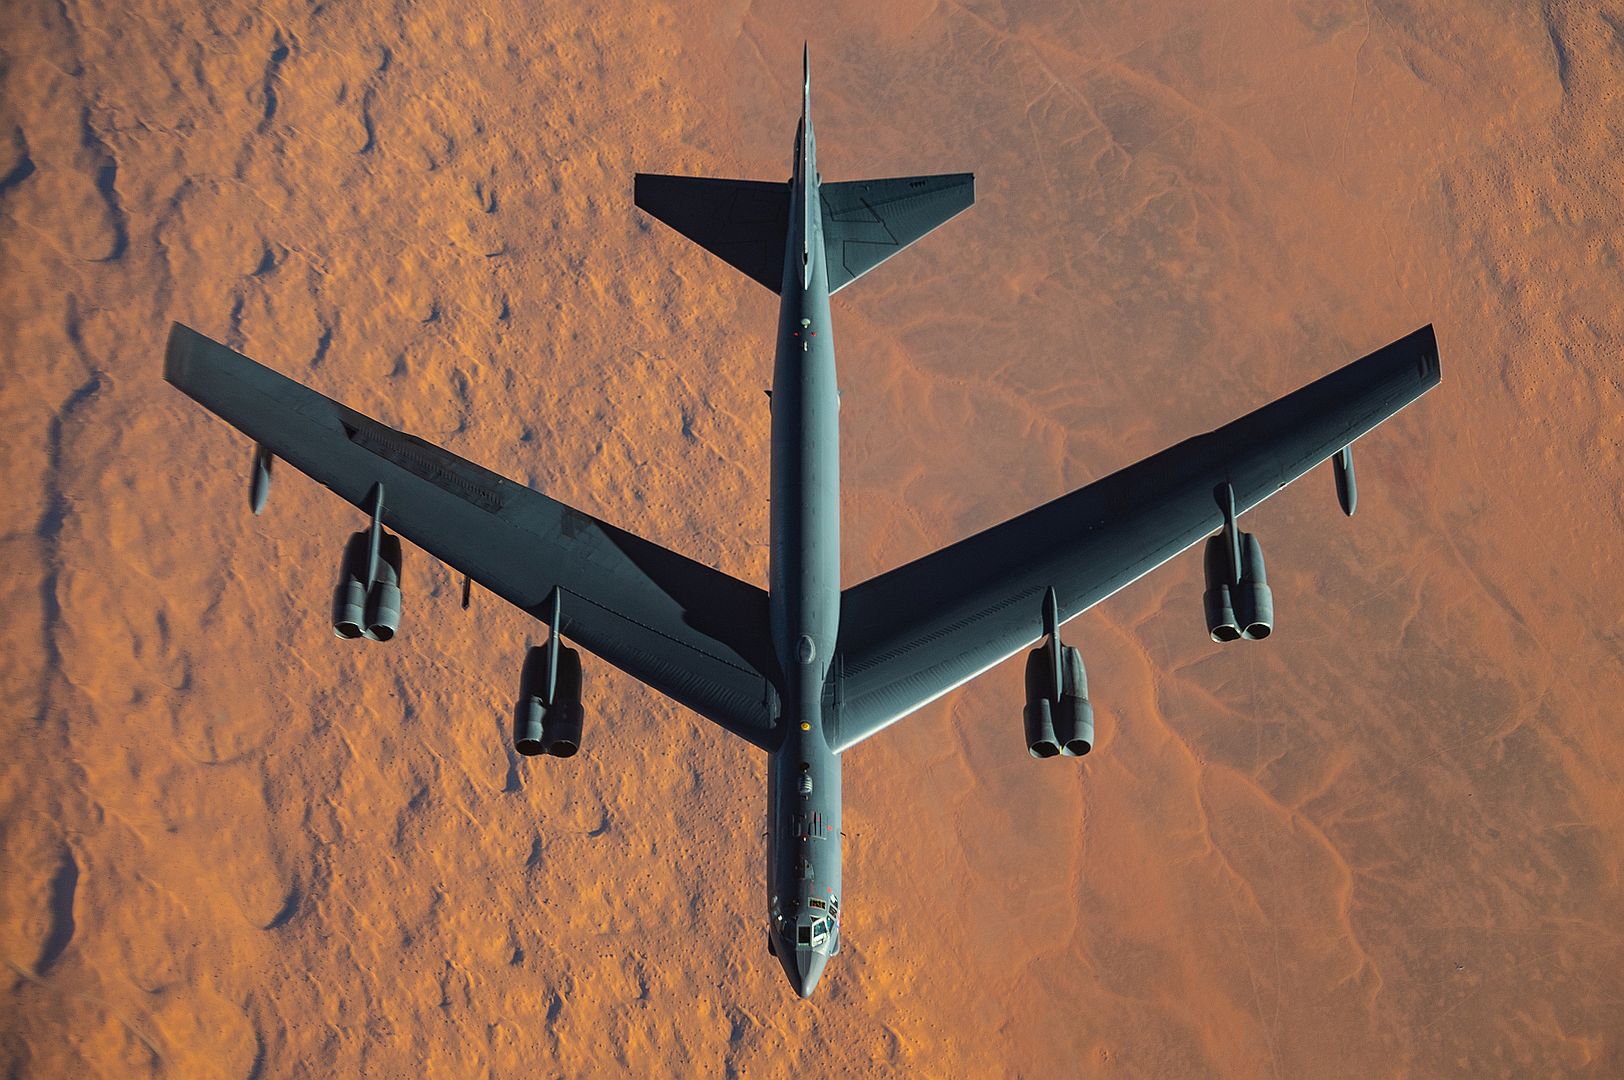 B 52 Stratofortress Assigned To The 2nd Bomb Wing Flies Over Southwest Asia During A Aerial Refueling Mission With KC 135 Stratotanker Aircraft Assigned To The 340th Expeditionary Air Refueling Squadron 1